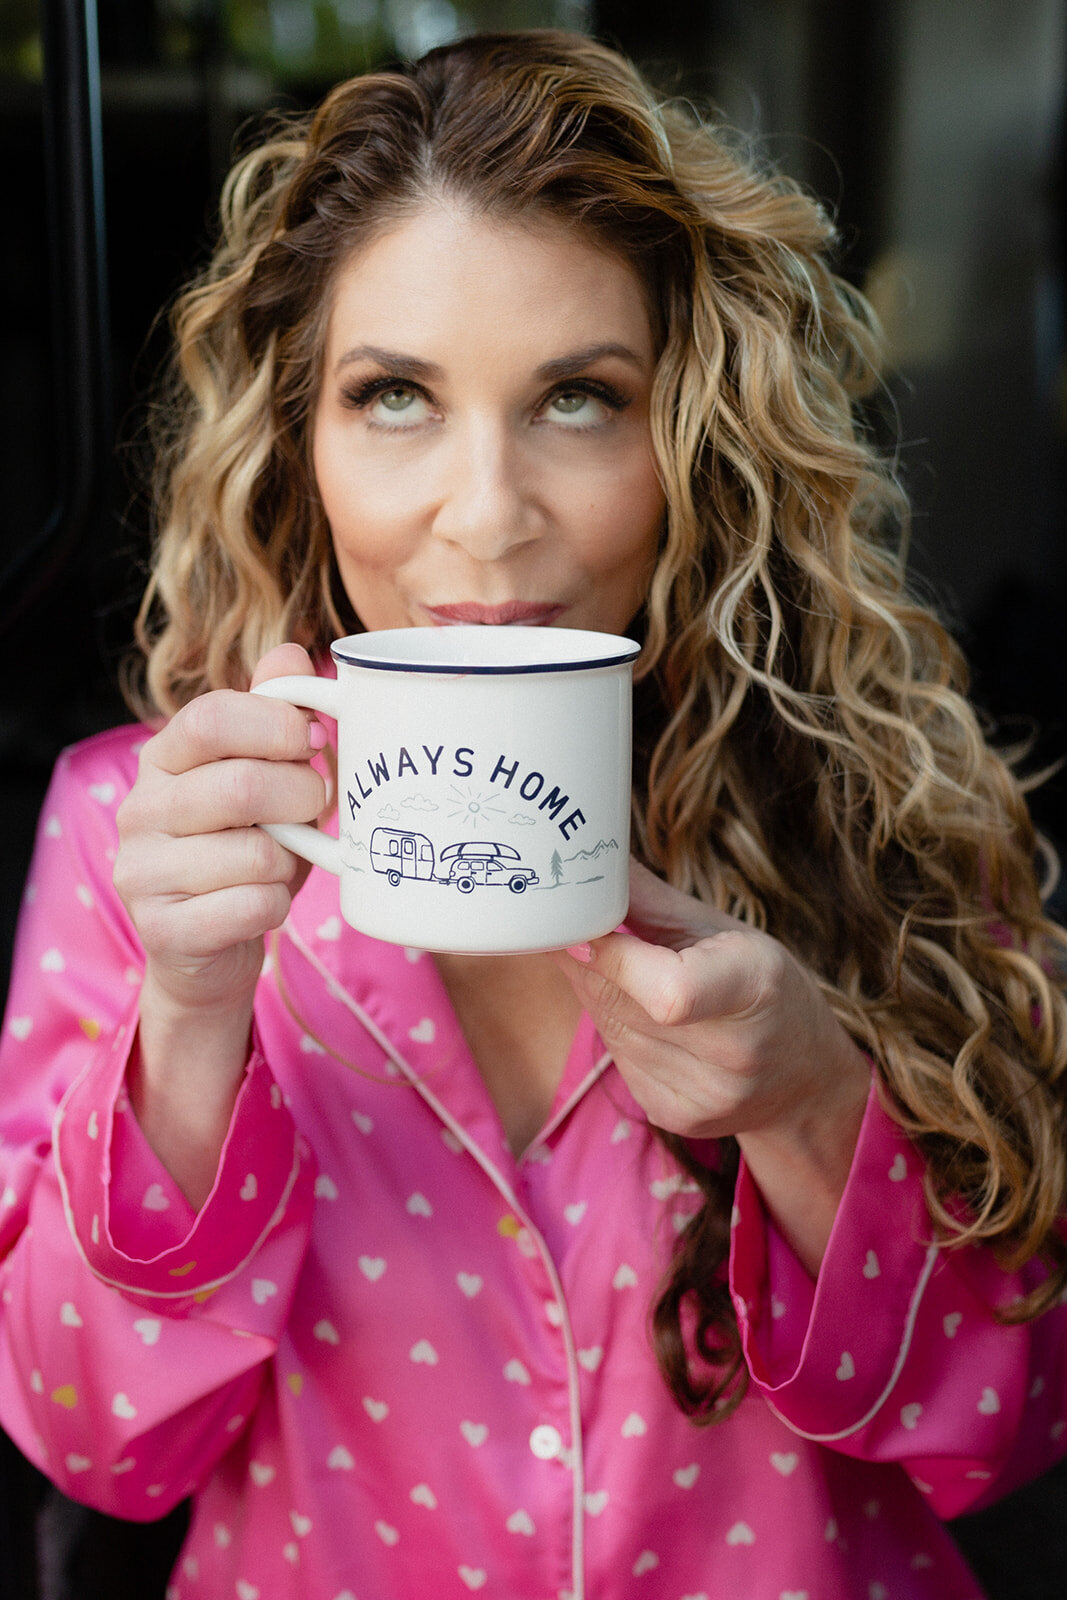 close up shot of a woman sitting in pink pjs with white hearts, drinking from a mug that says Always Home, and looking upward.